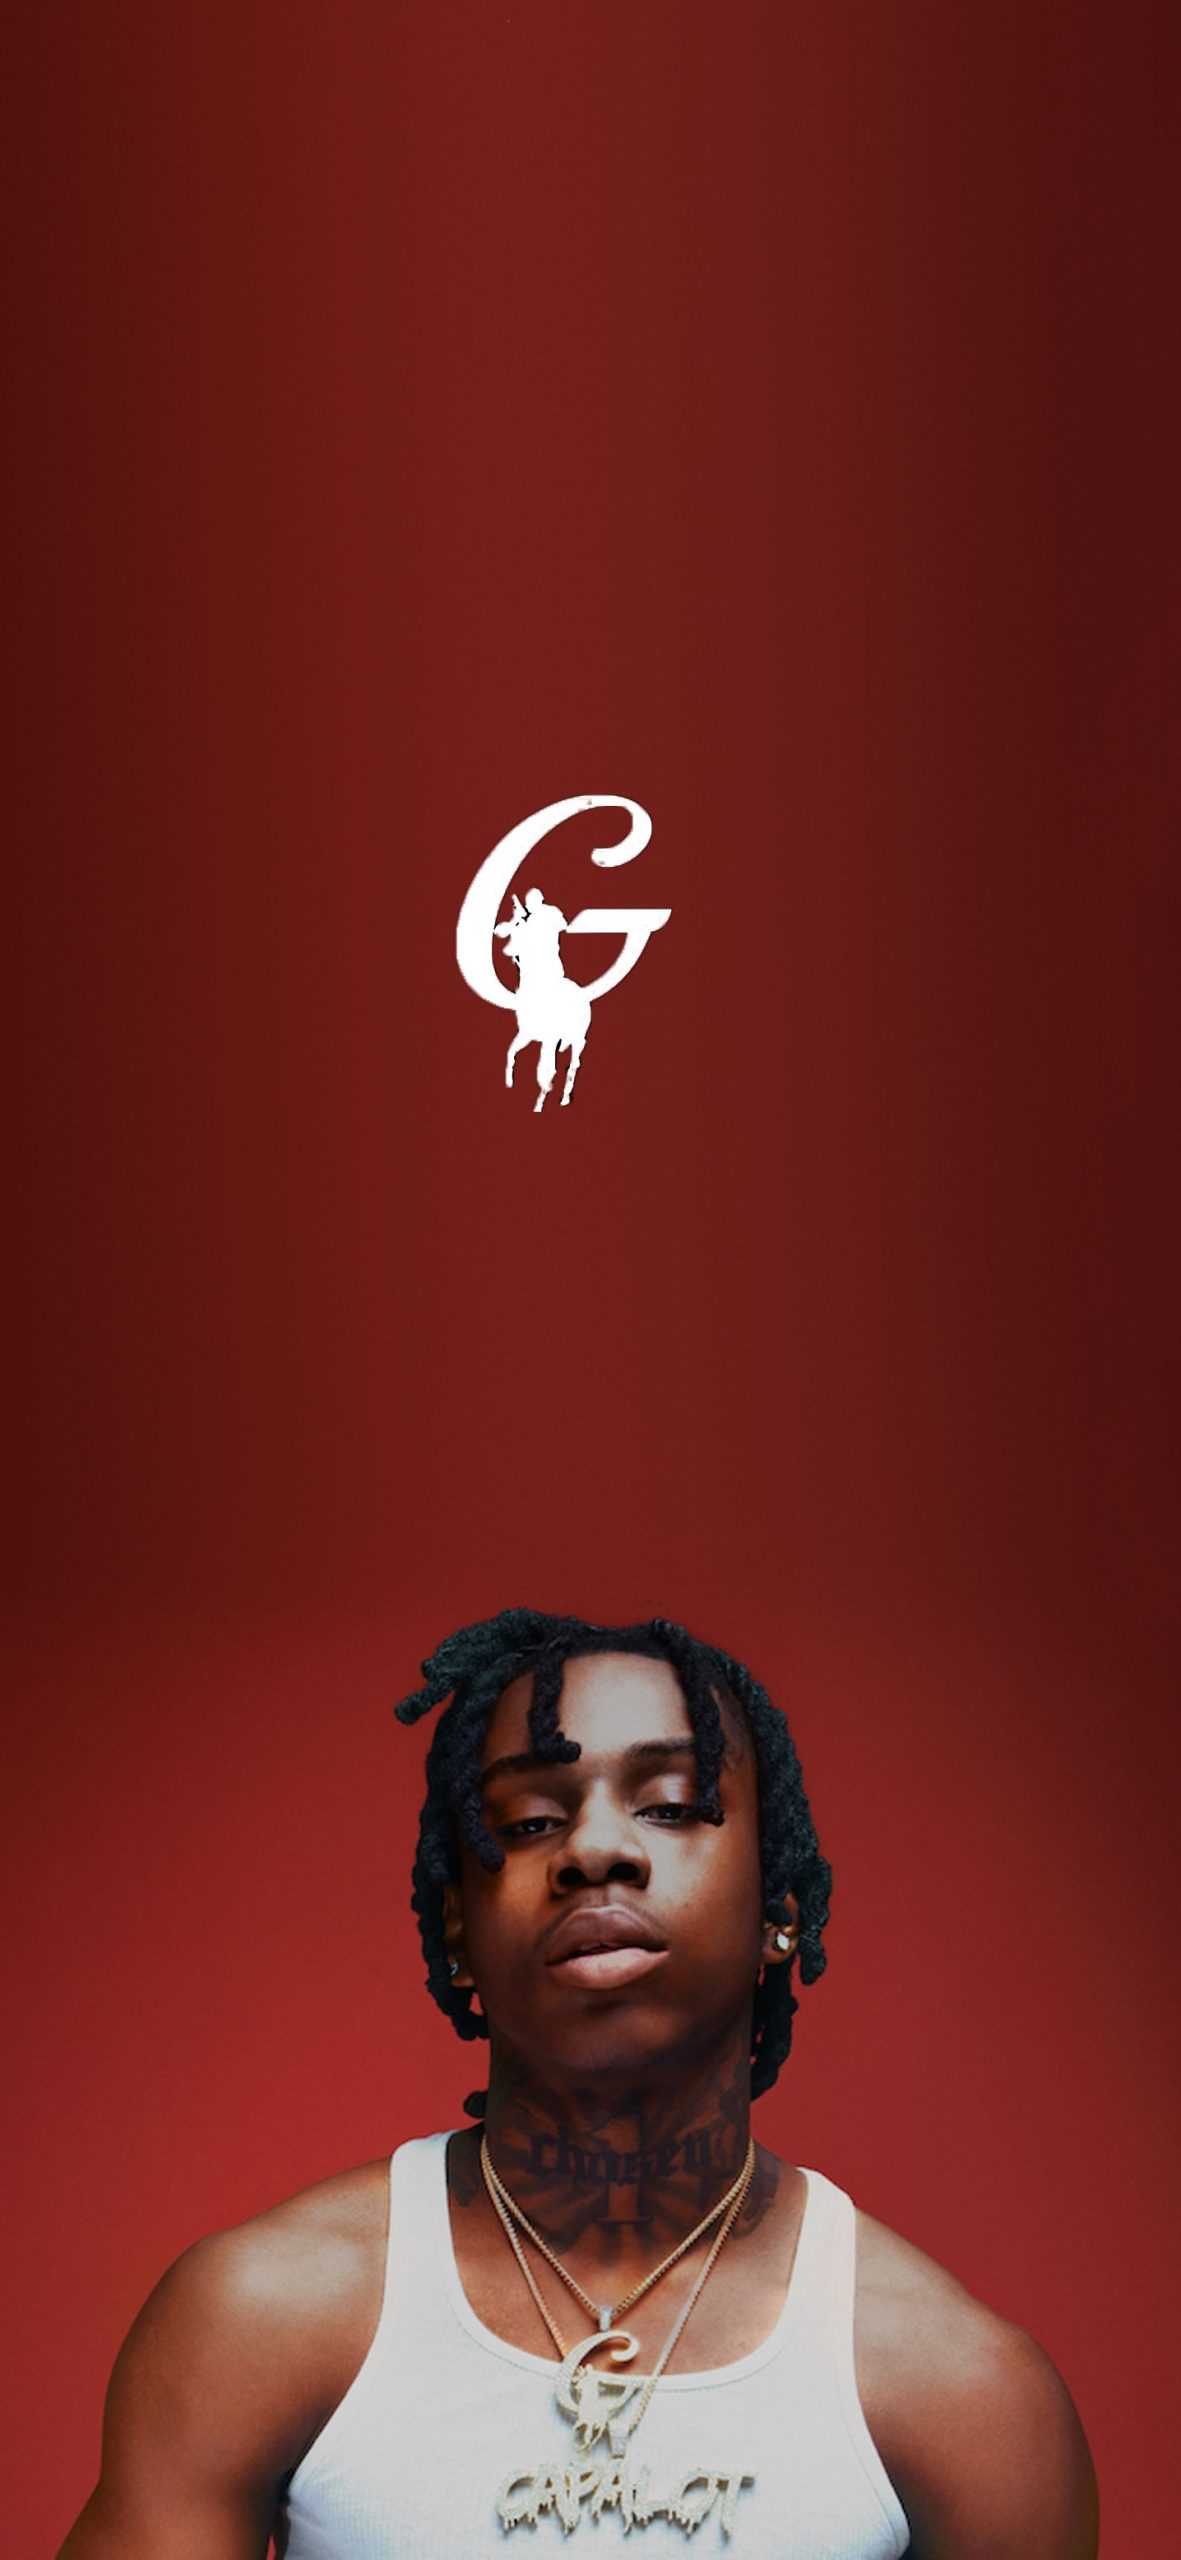 Polo G Background 1